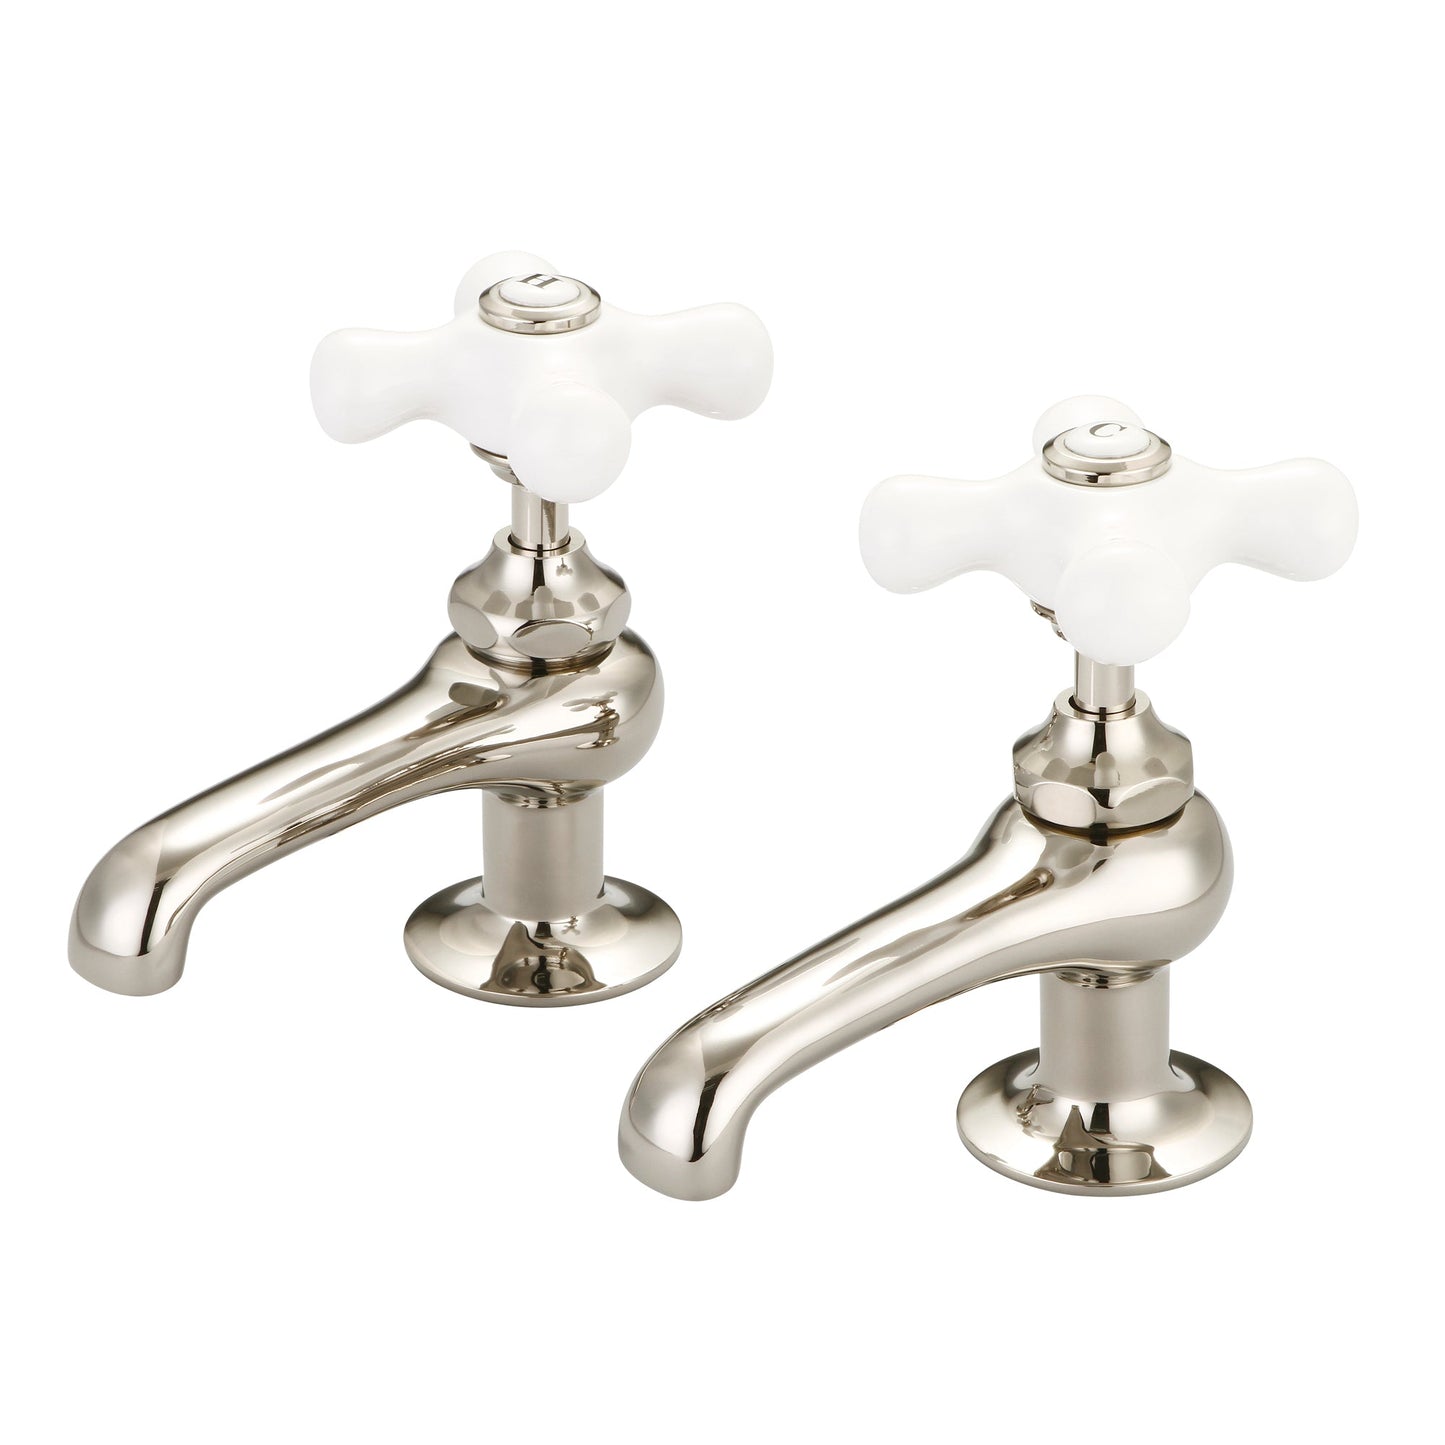 Vintage Classic Basin Cocks Lavatory Faucets With Porcelain Cross Handles, Hot And Cold Labels Included